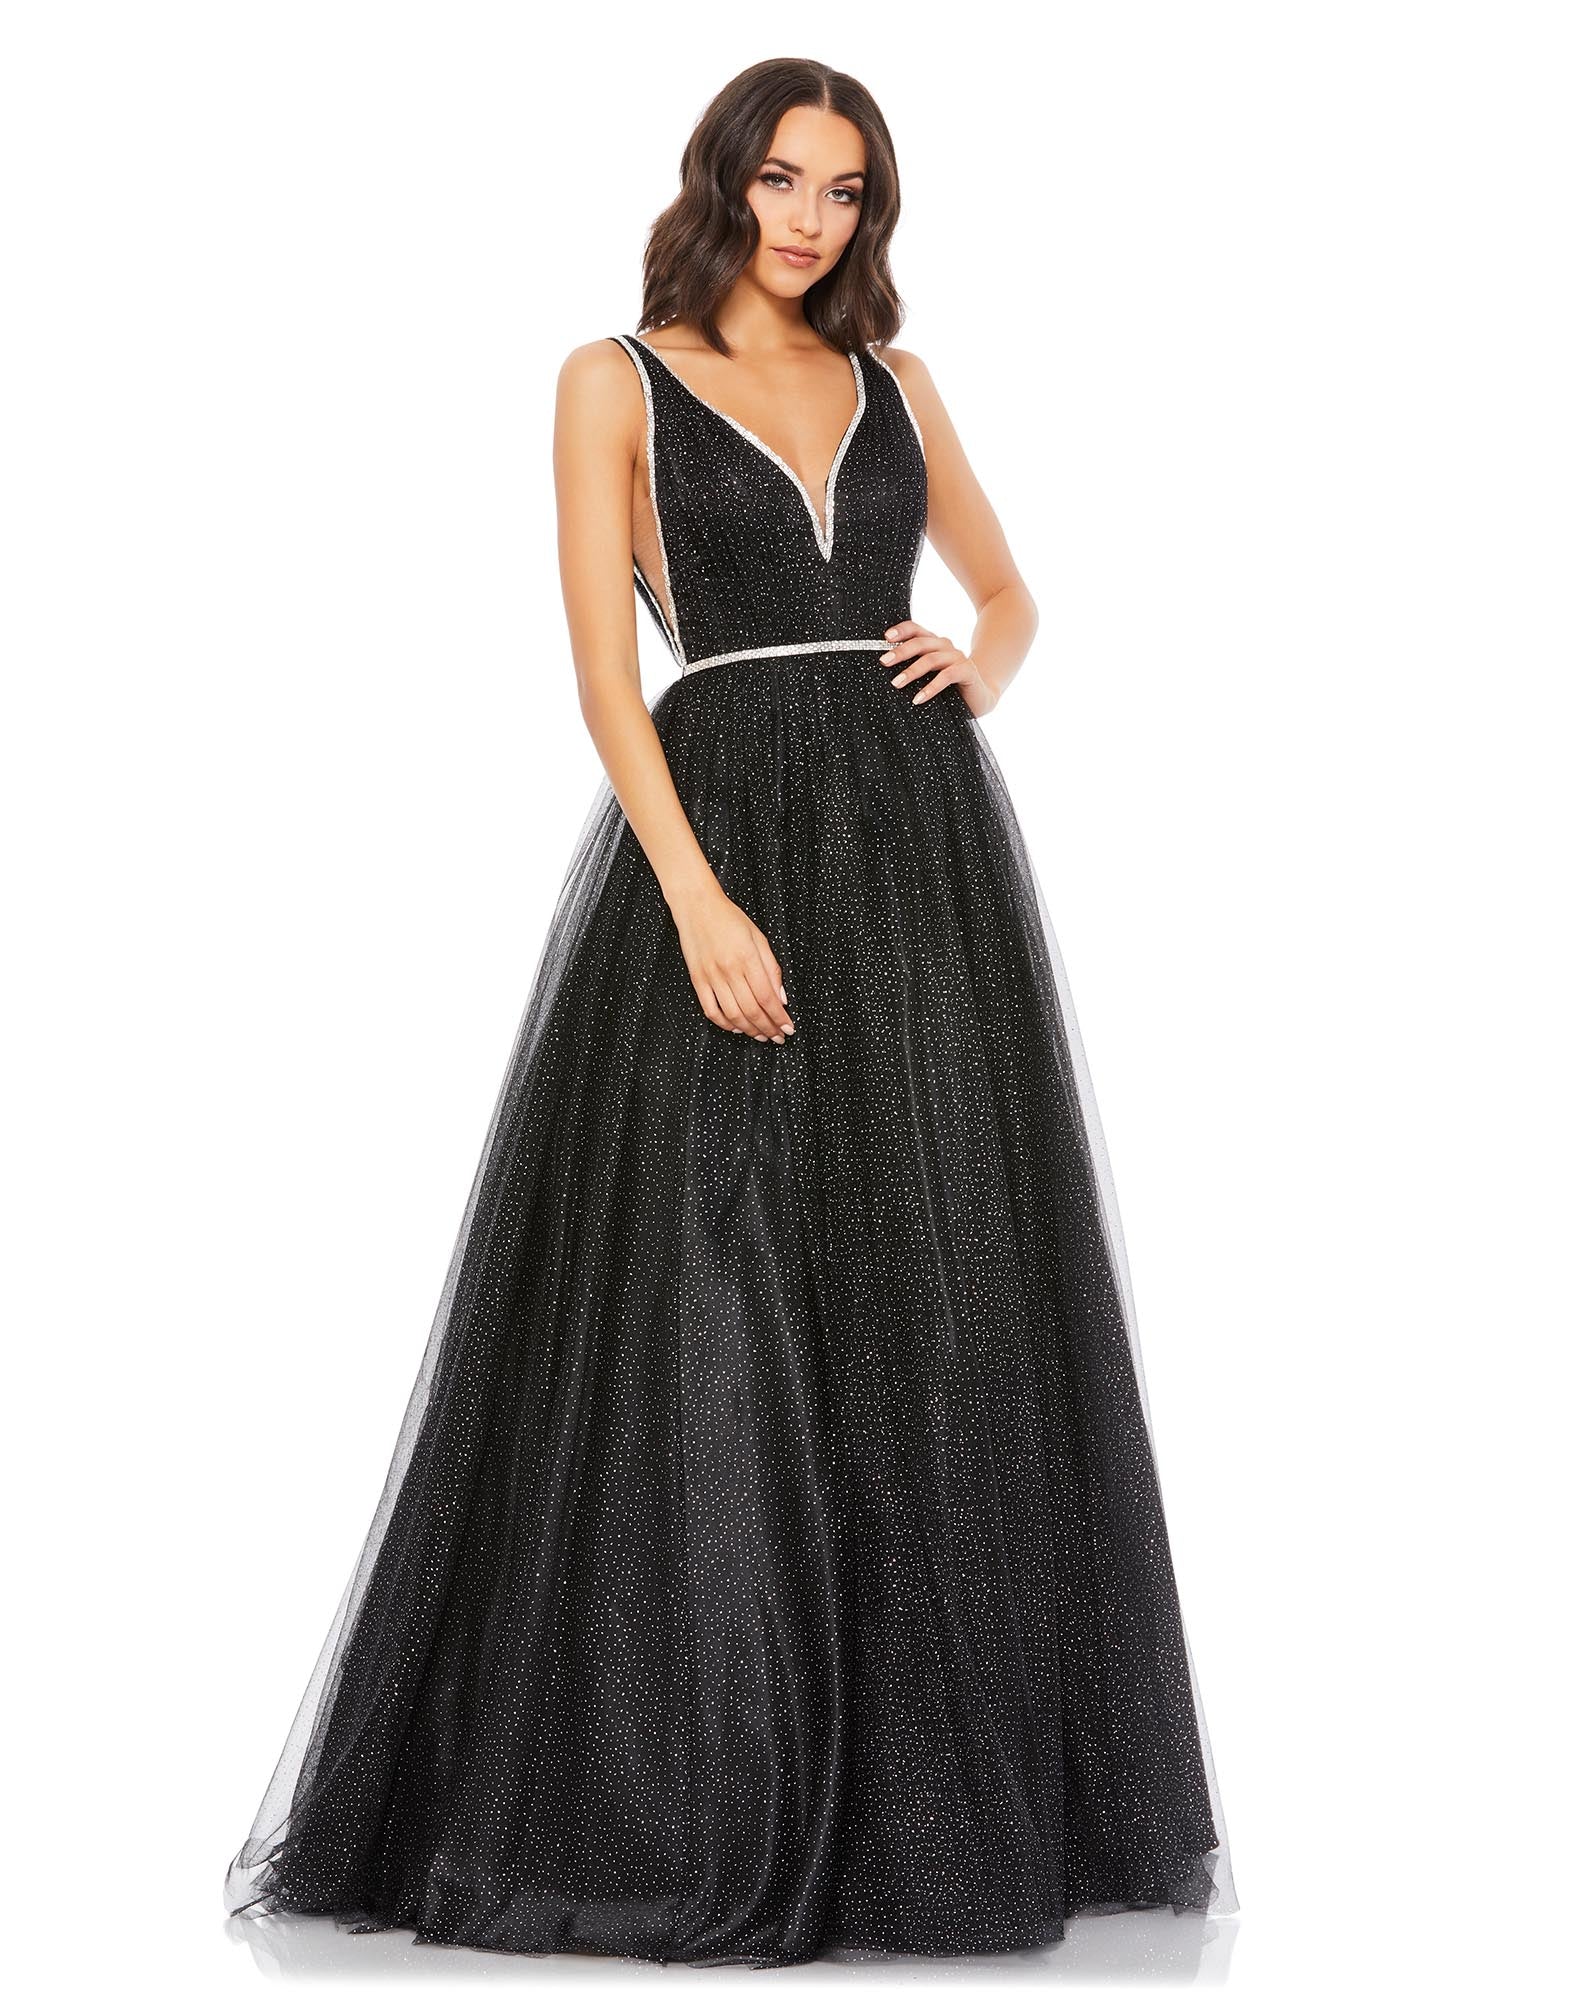 Rhinestone Detailed Tulle Ball Gown